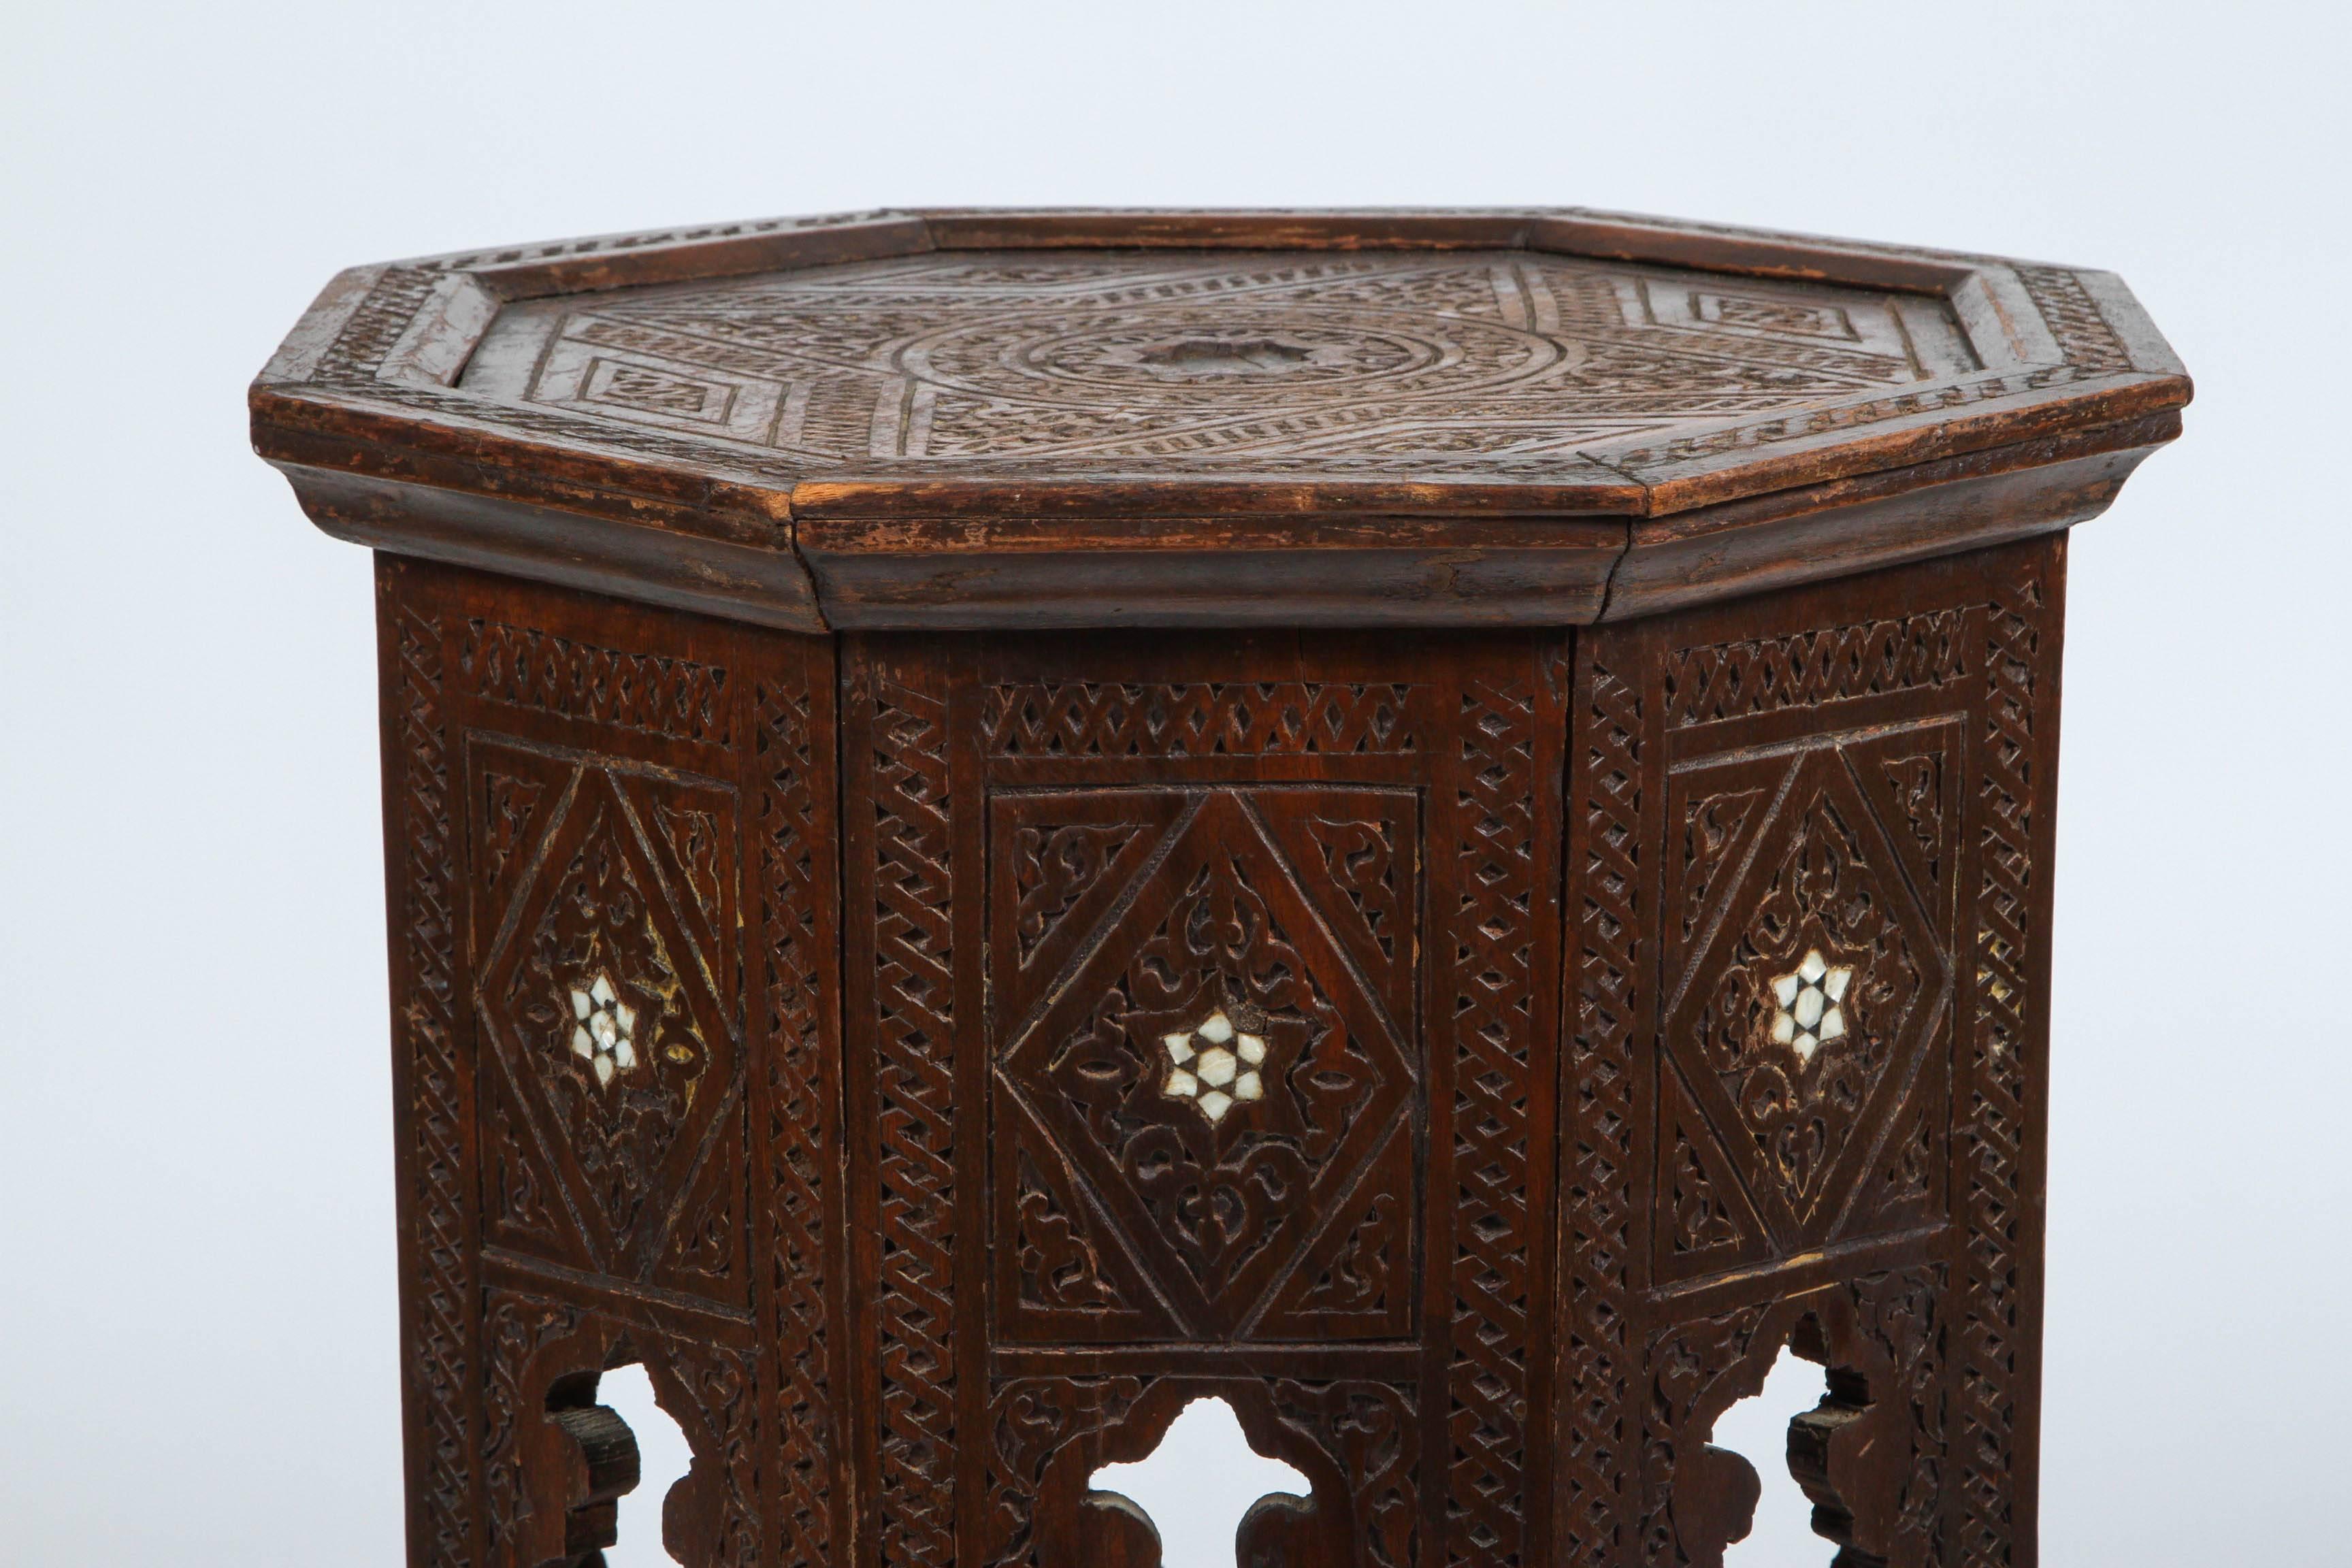 Moorish Syrian 19th Century Octagonal Table Inlaid with Mother-of-Pearl